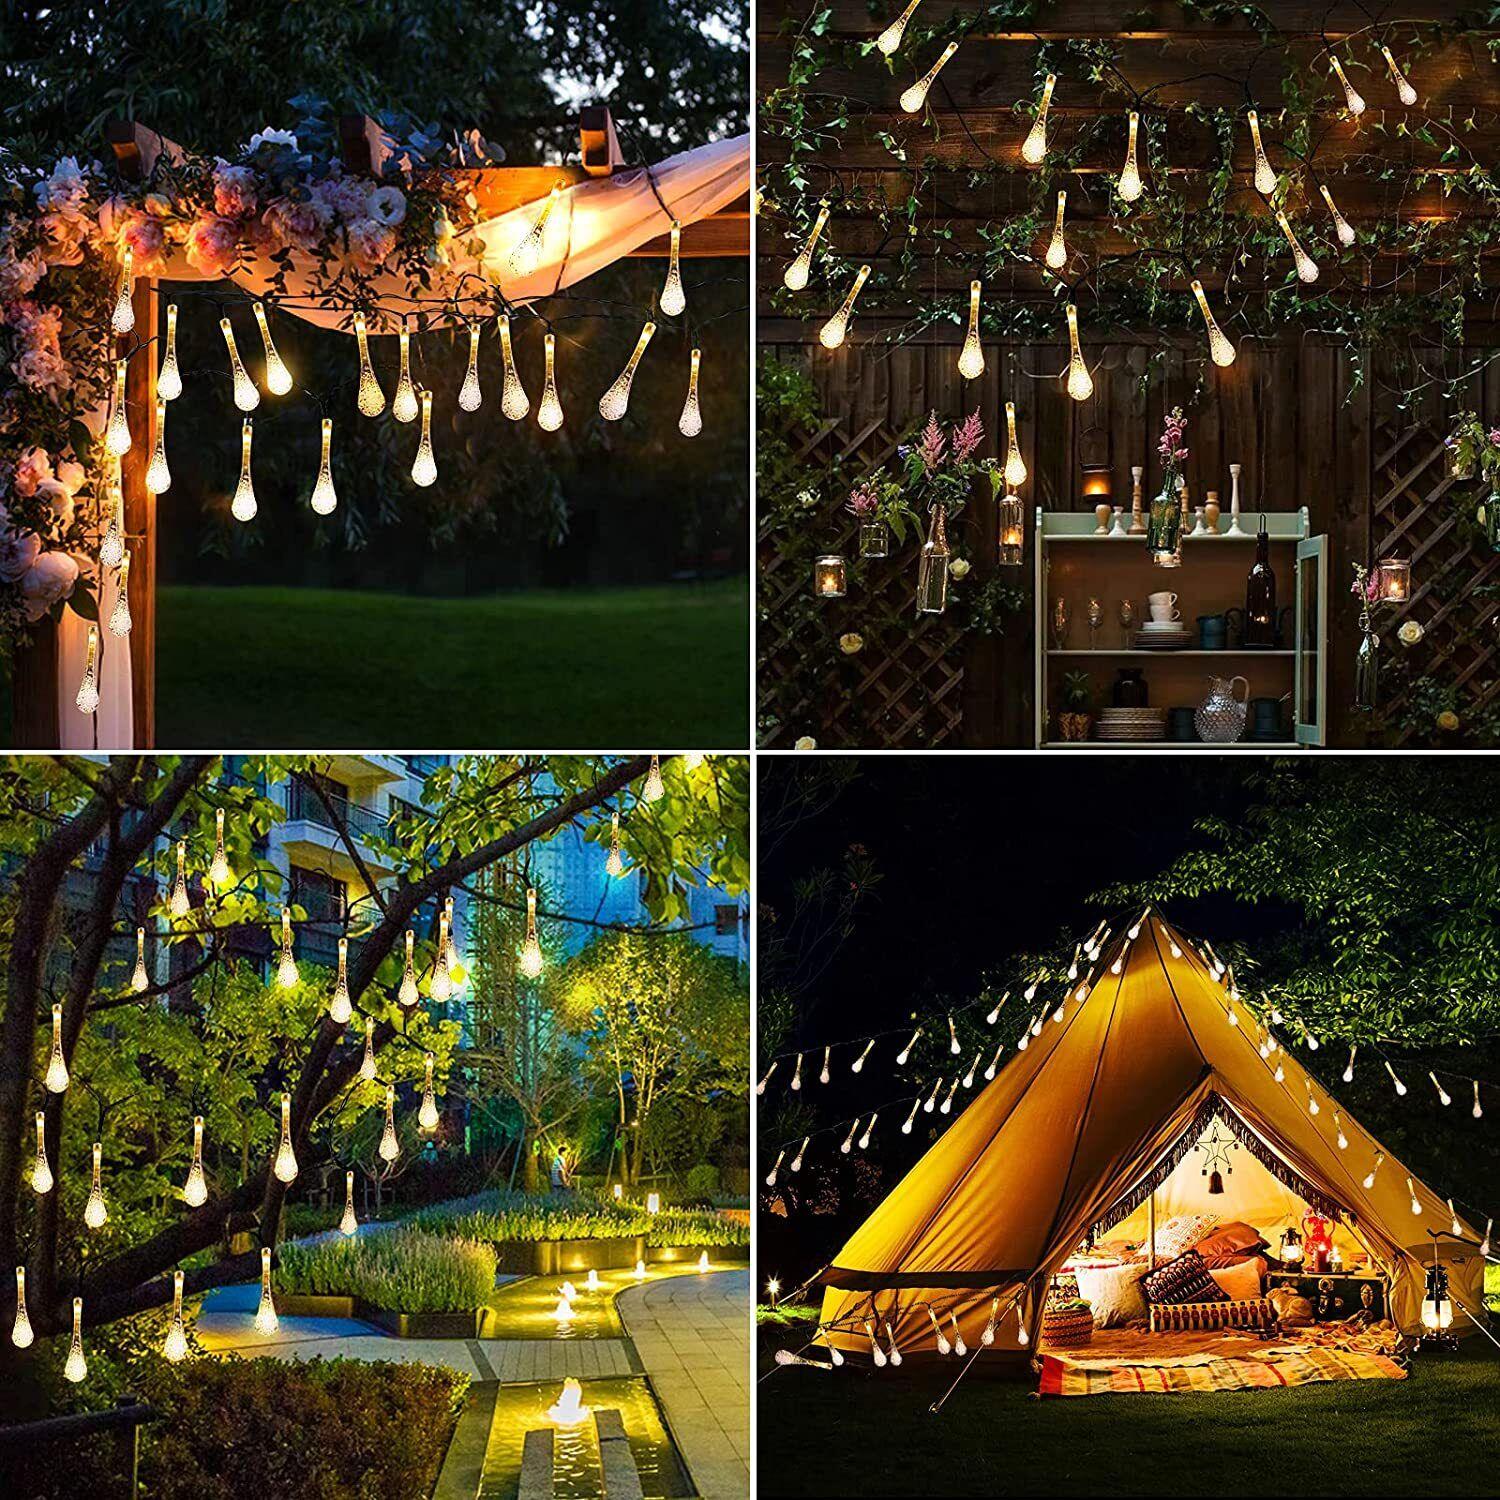 Raindrop Design Solar Powered Warm White Led String Lights by GEEZY - The Magic Toy Shop